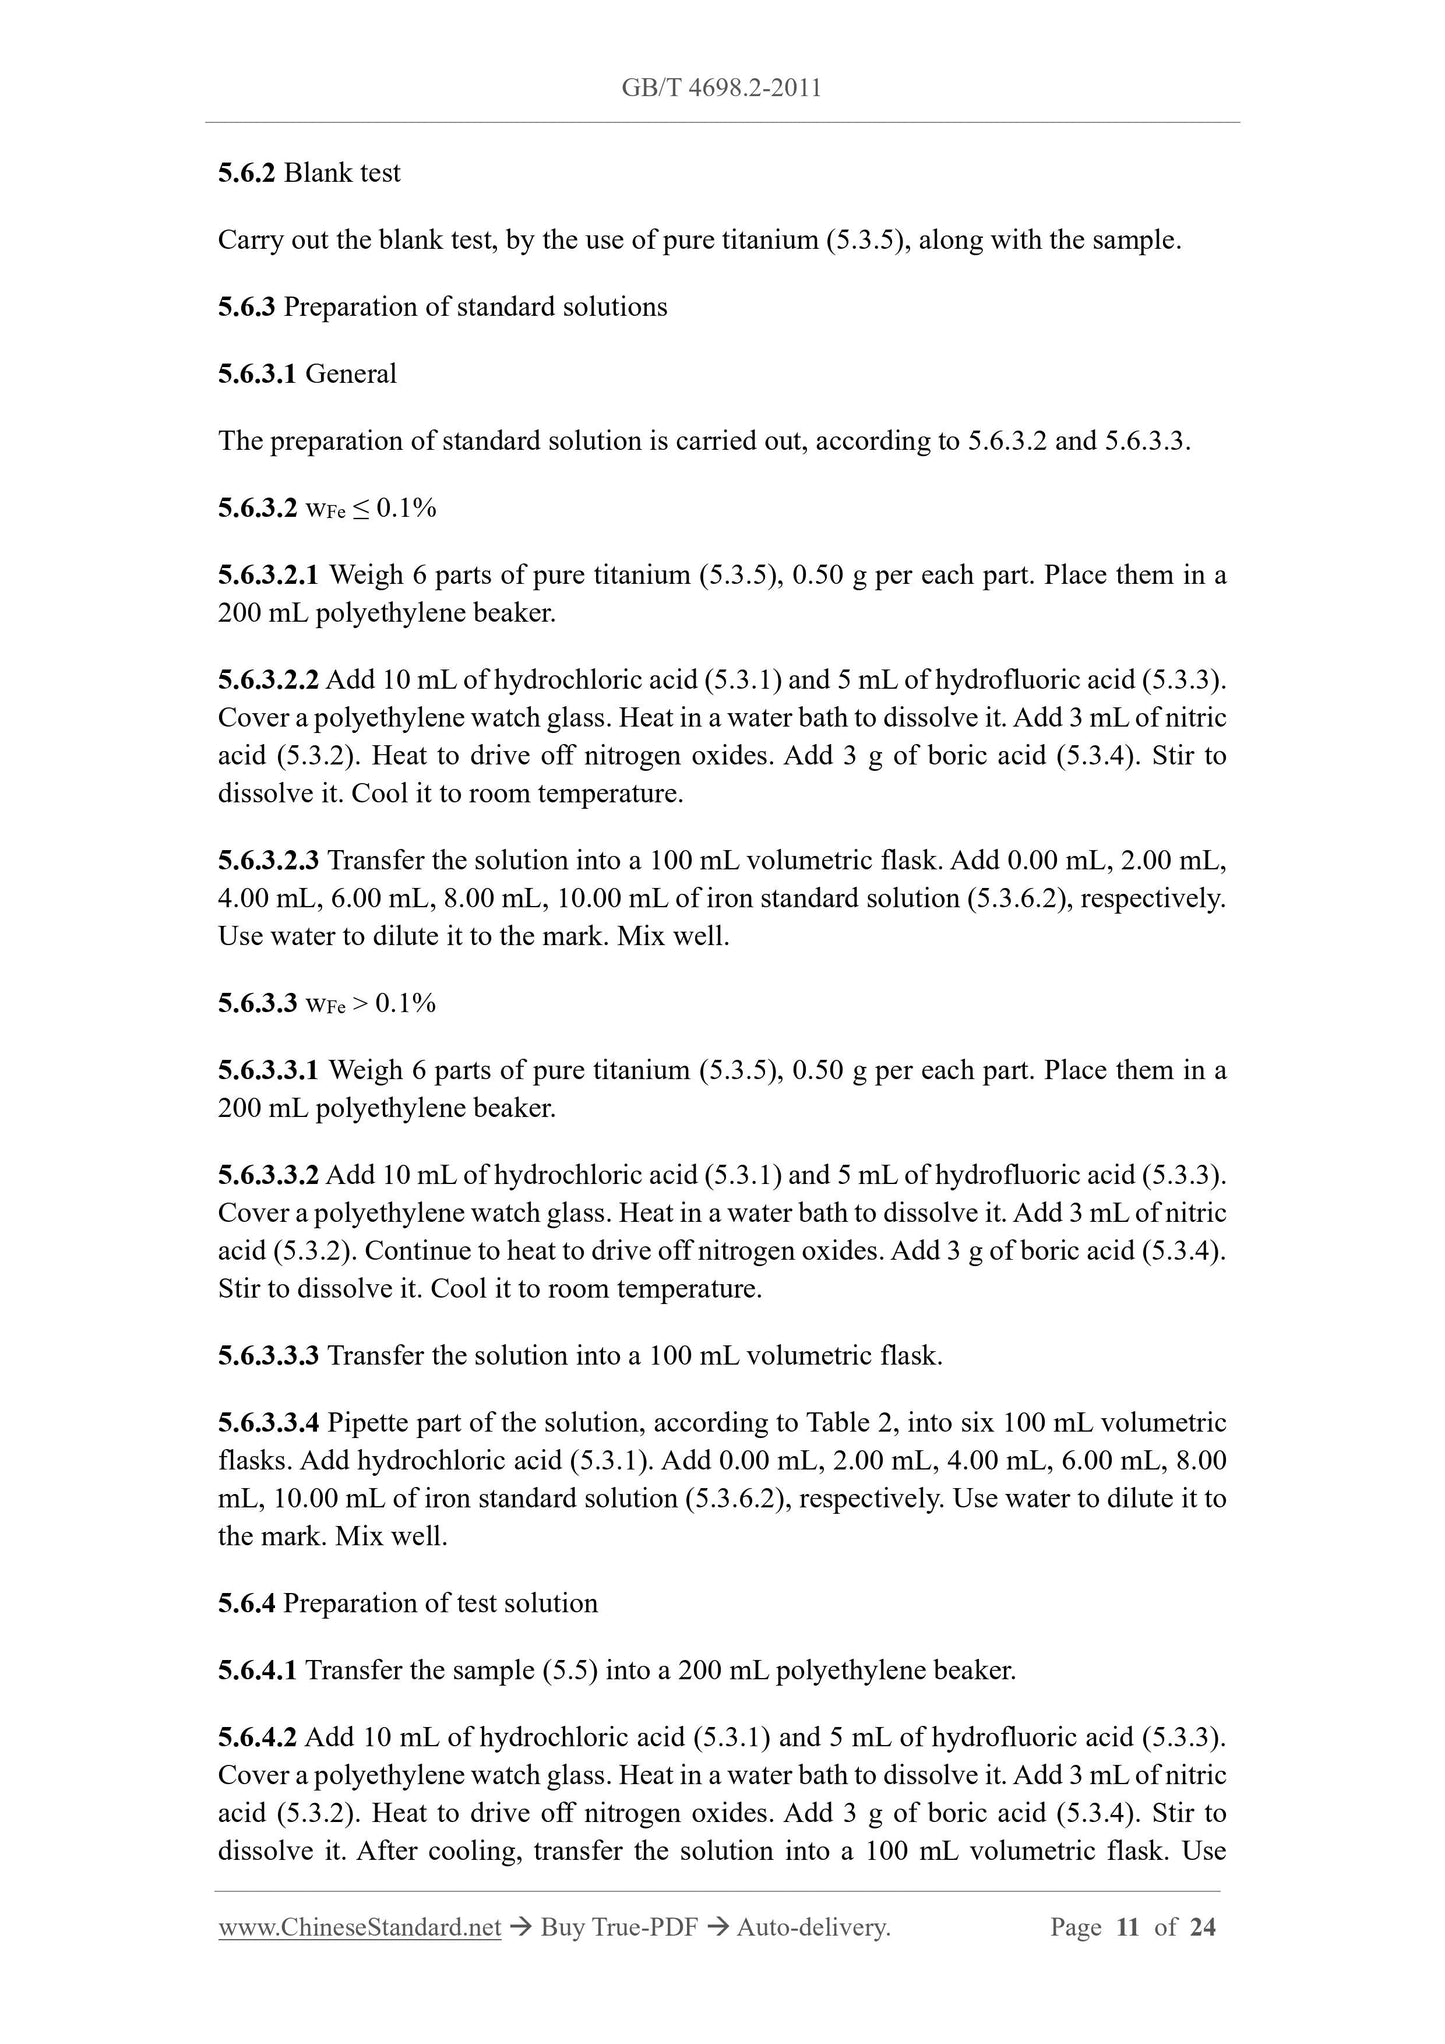 GB/T 4698.2-2011 Page 6